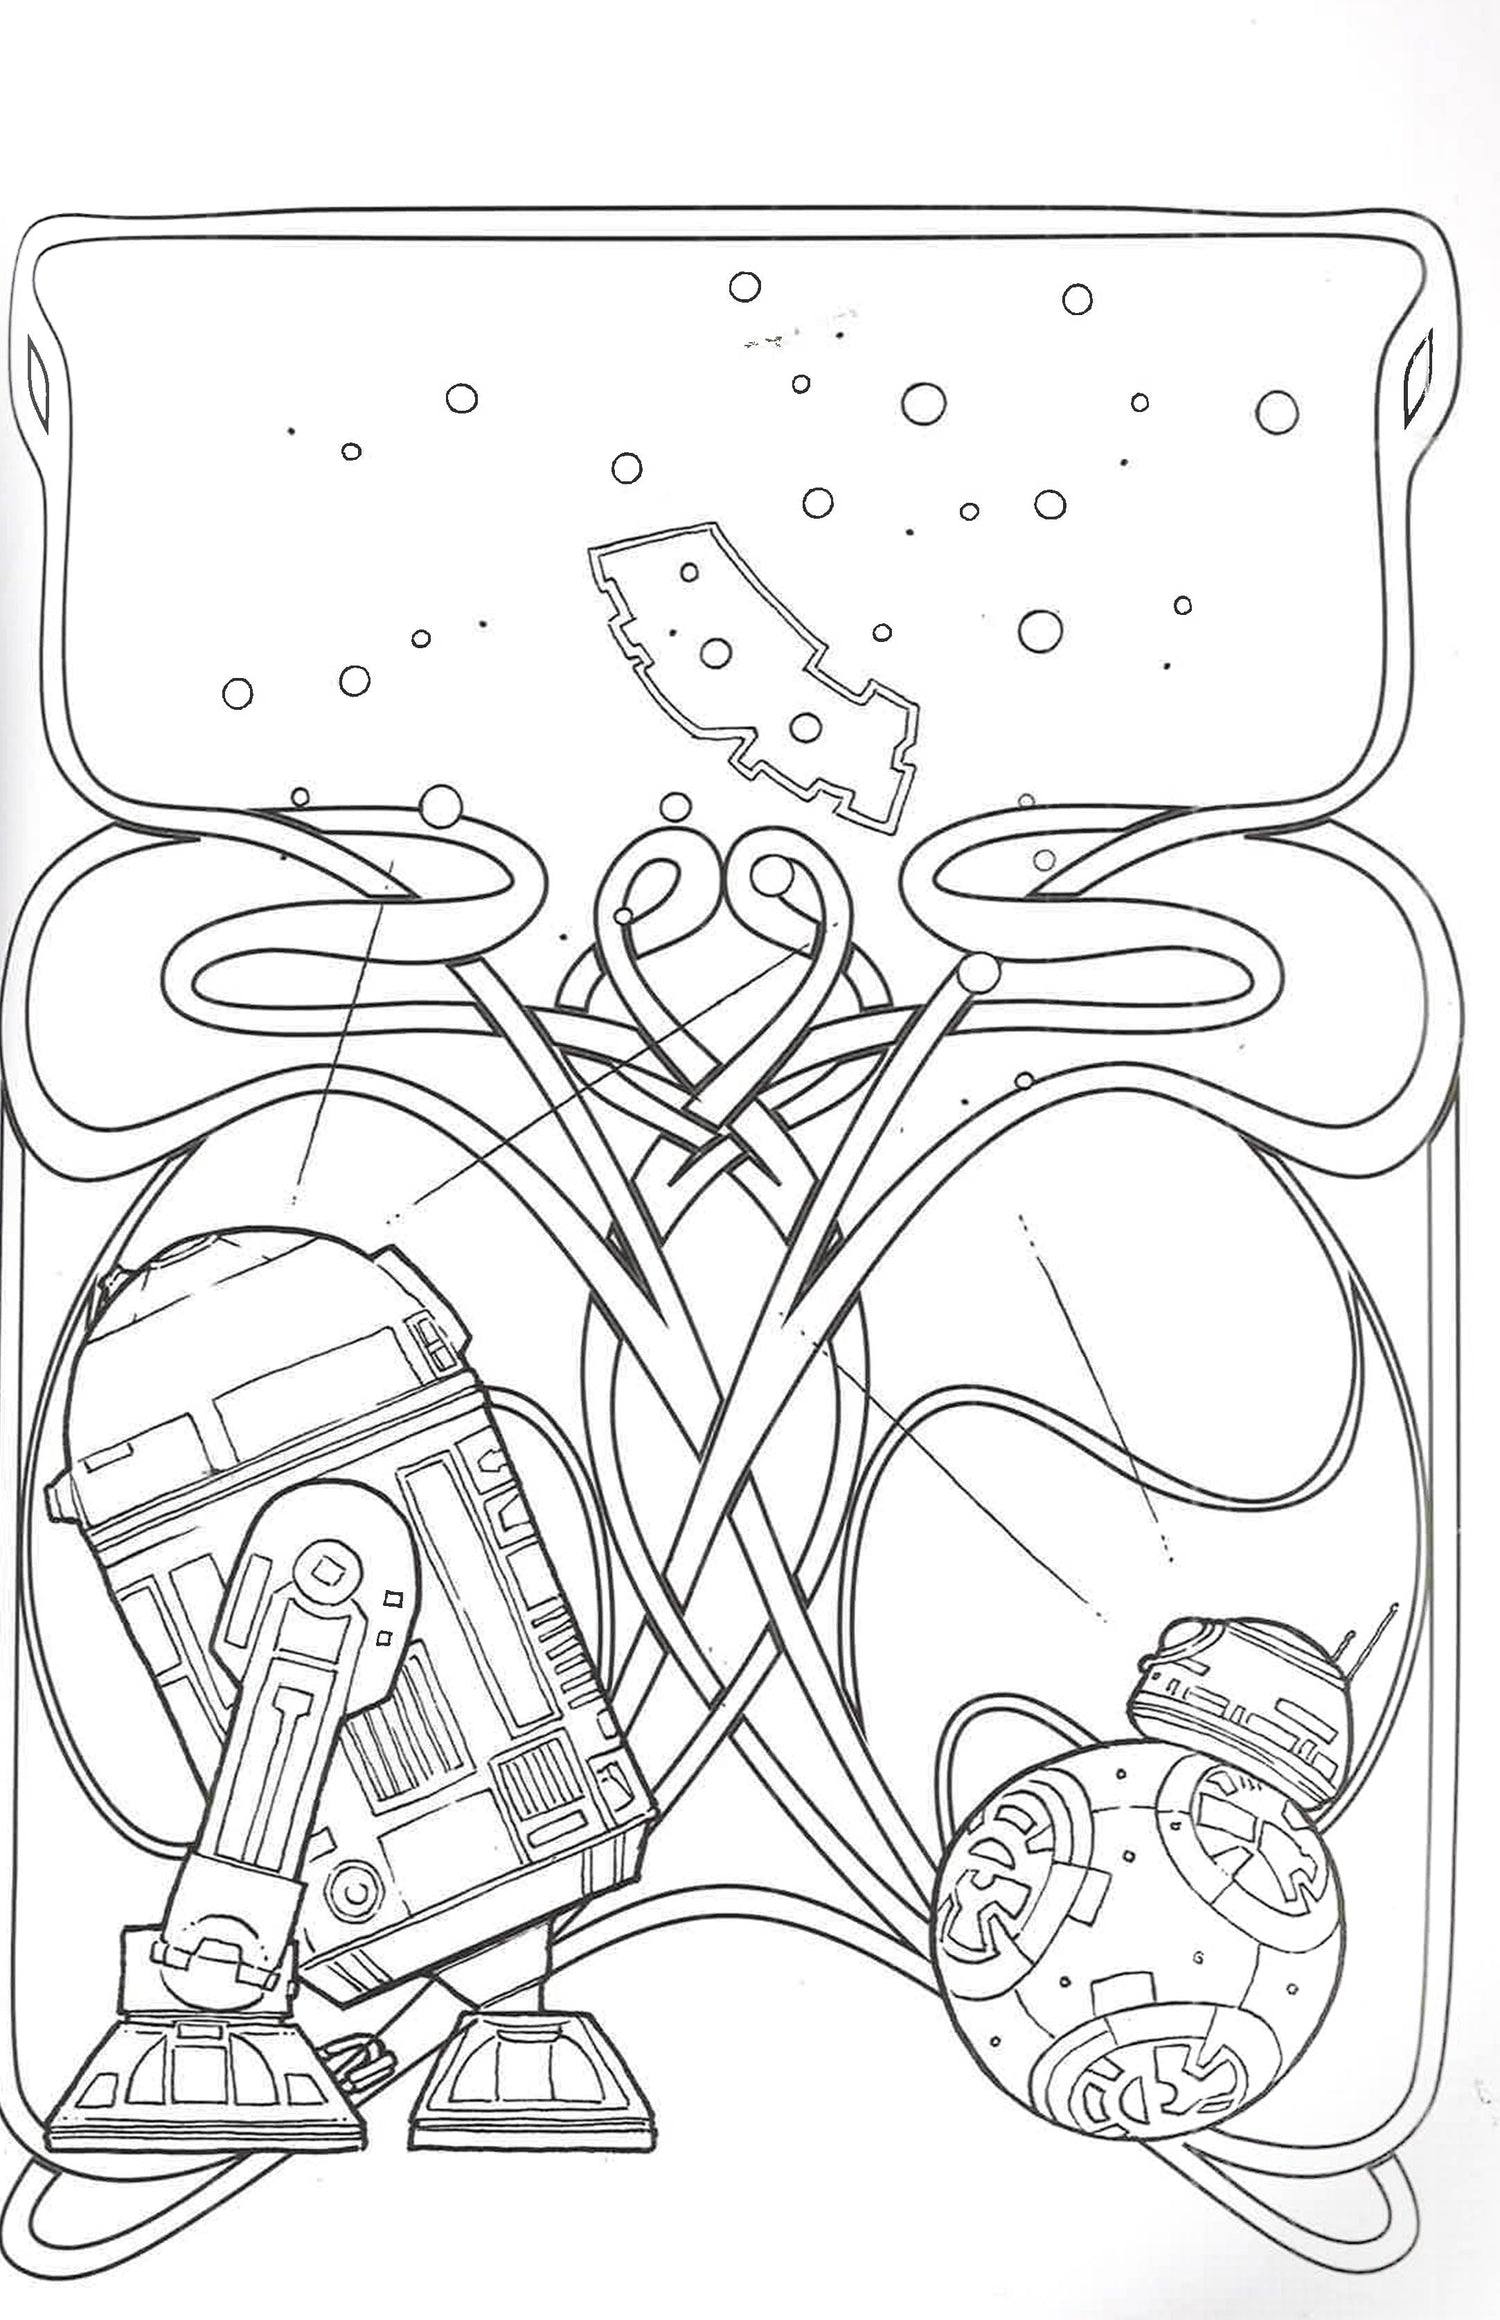 Star wars art of colouring the force awakens star wars colouring book â